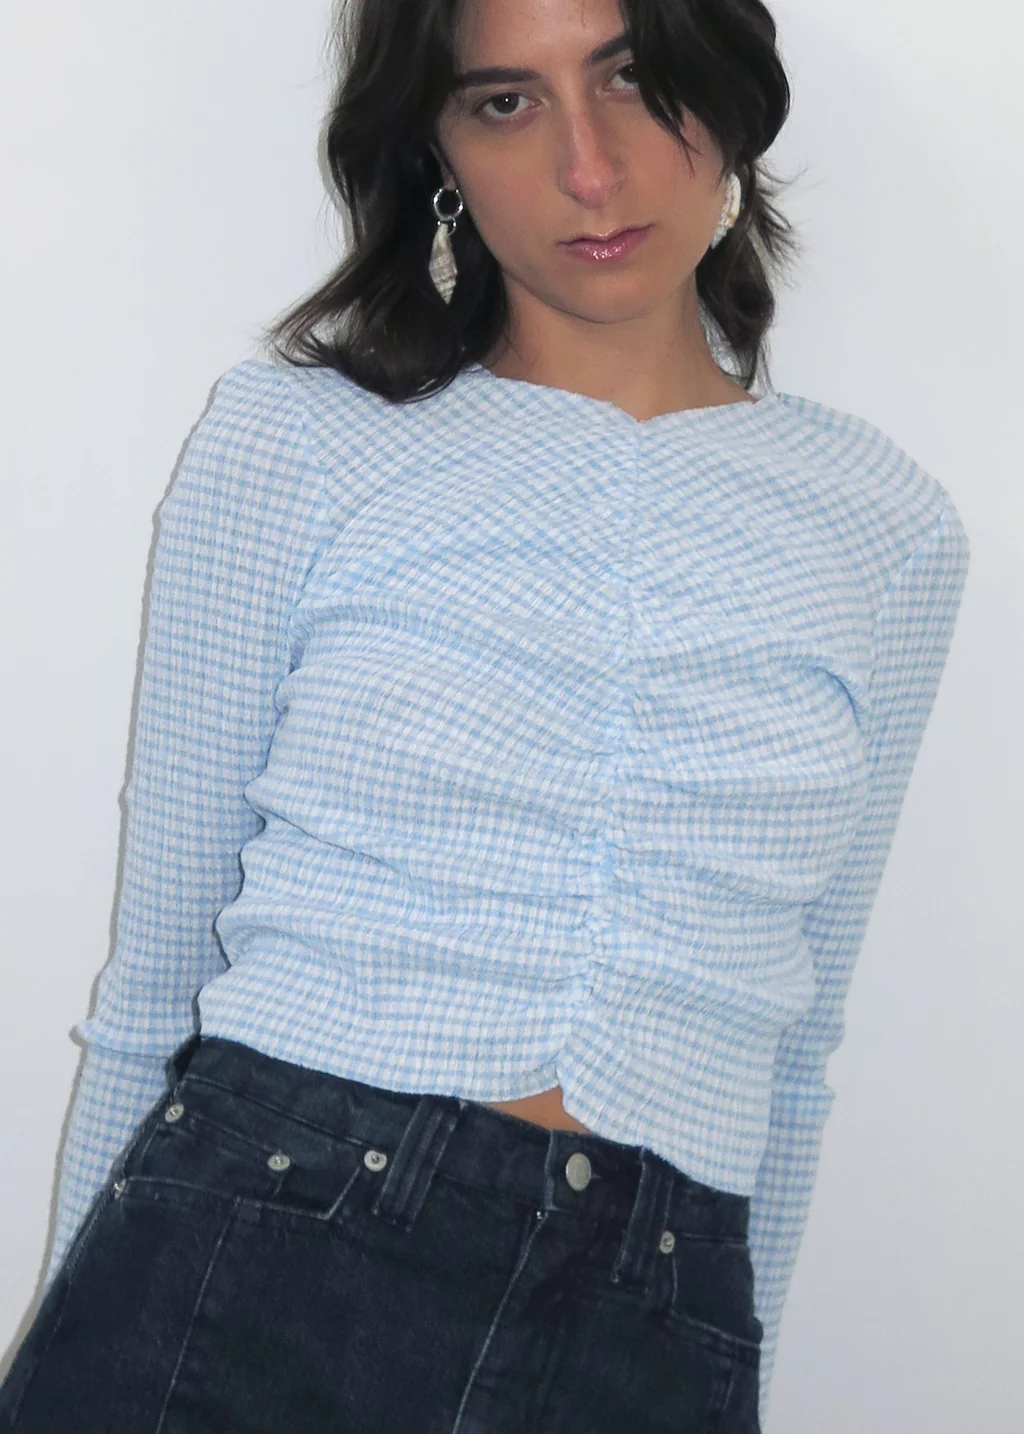 Product Image for Eternal Top, Blue Gingham